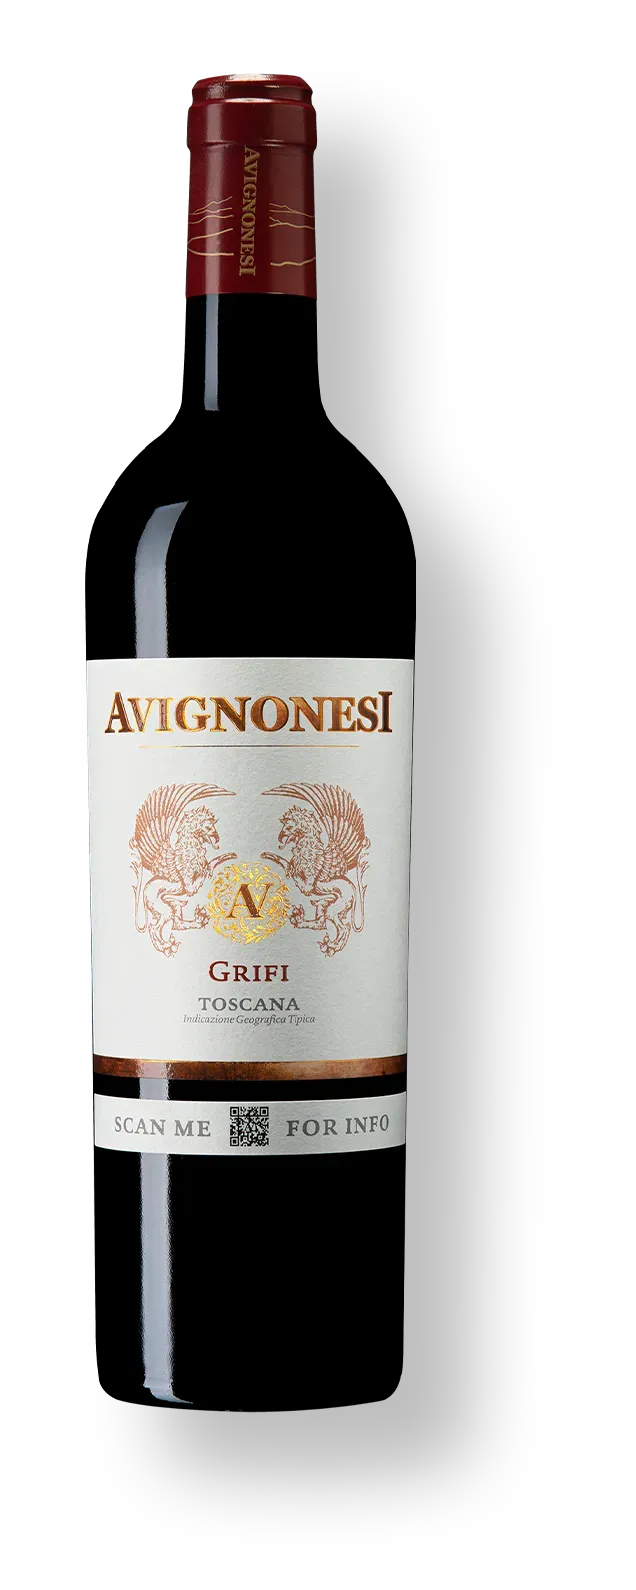 Bottle of Avignonesi Toscana Grifi from search results